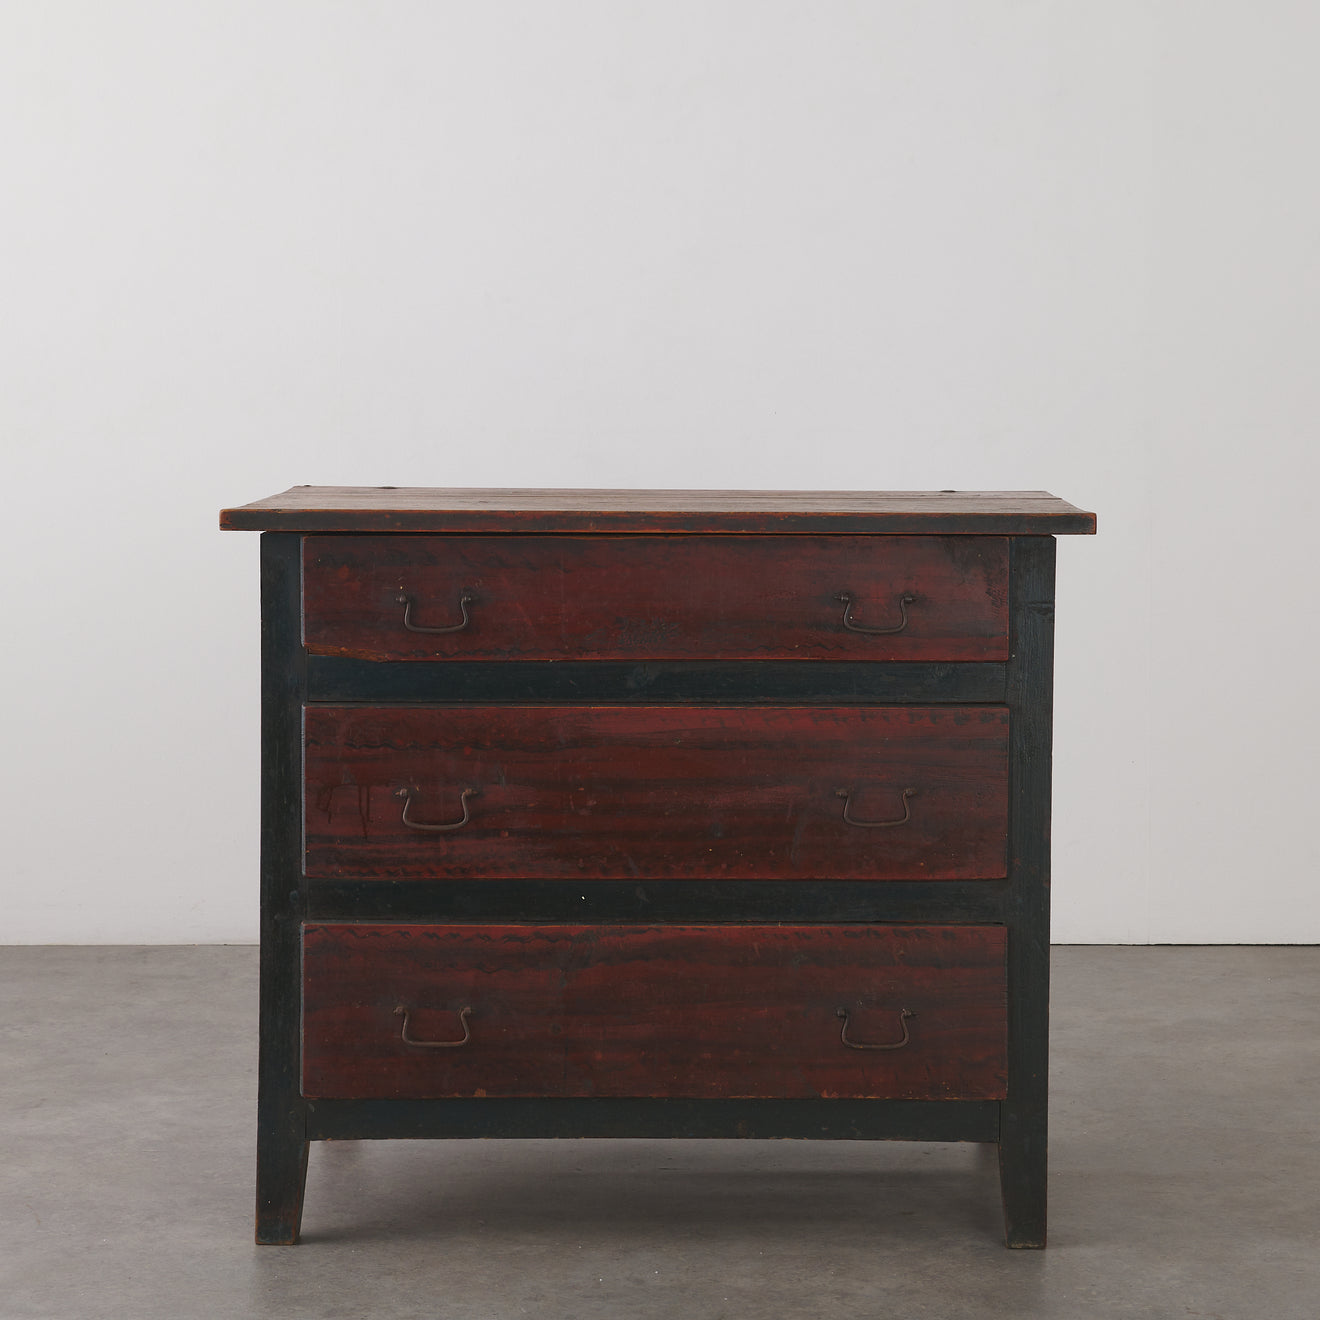 FAUX GRAIN PAINTED CHEST WITH TABLE, SWEDISH C1850